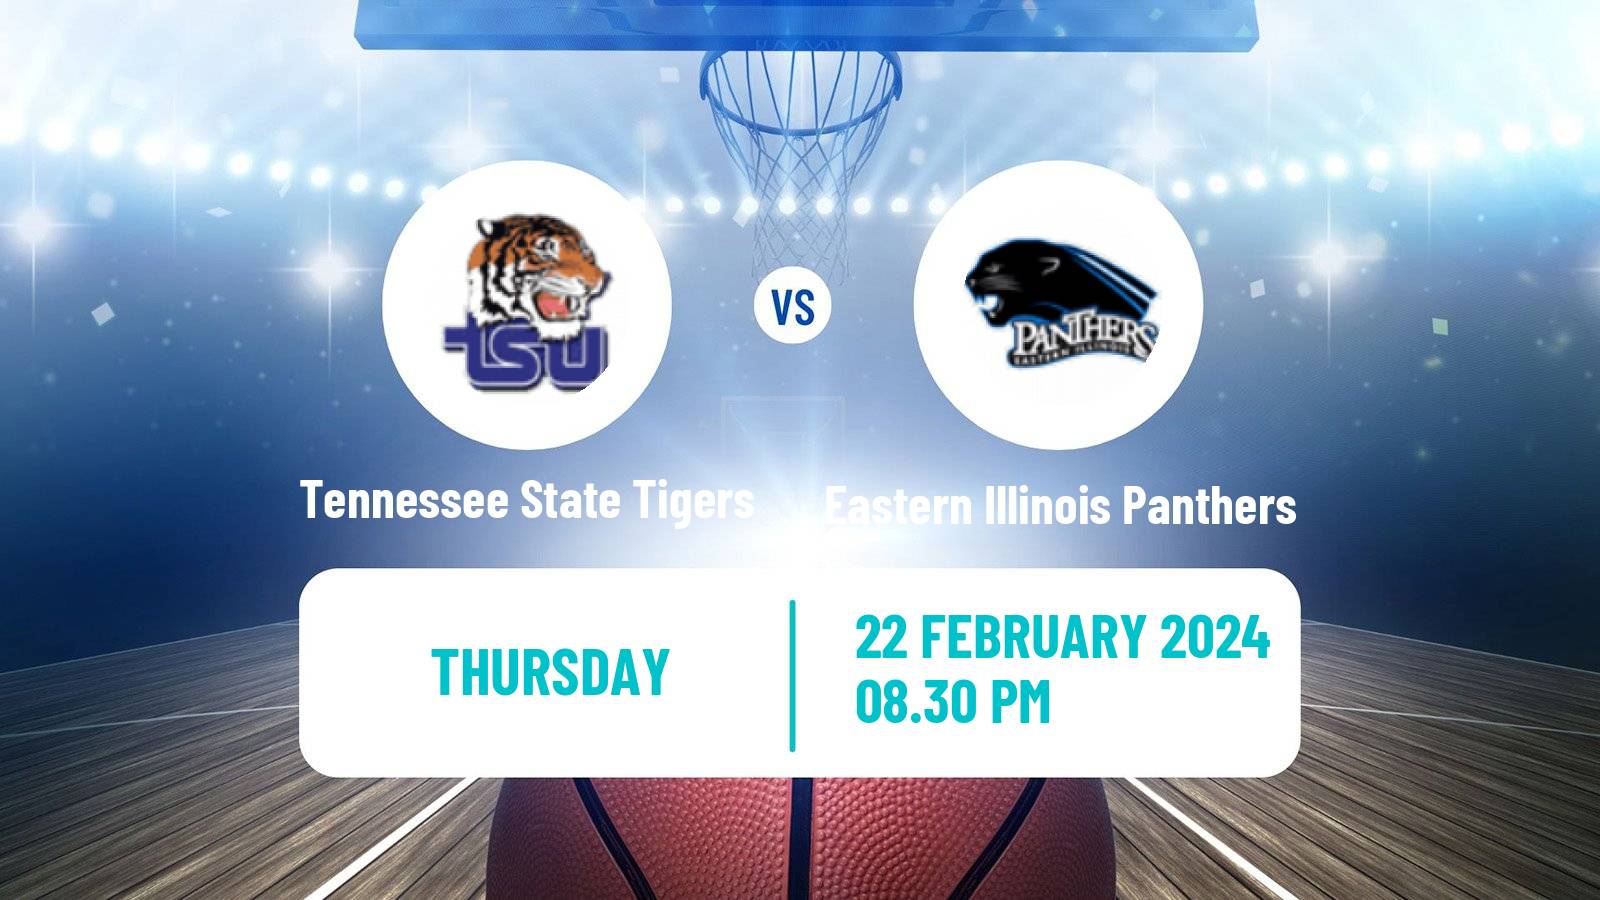 Basketball NCAA College Basketball Tennessee State Tigers - Eastern Illinois Panthers